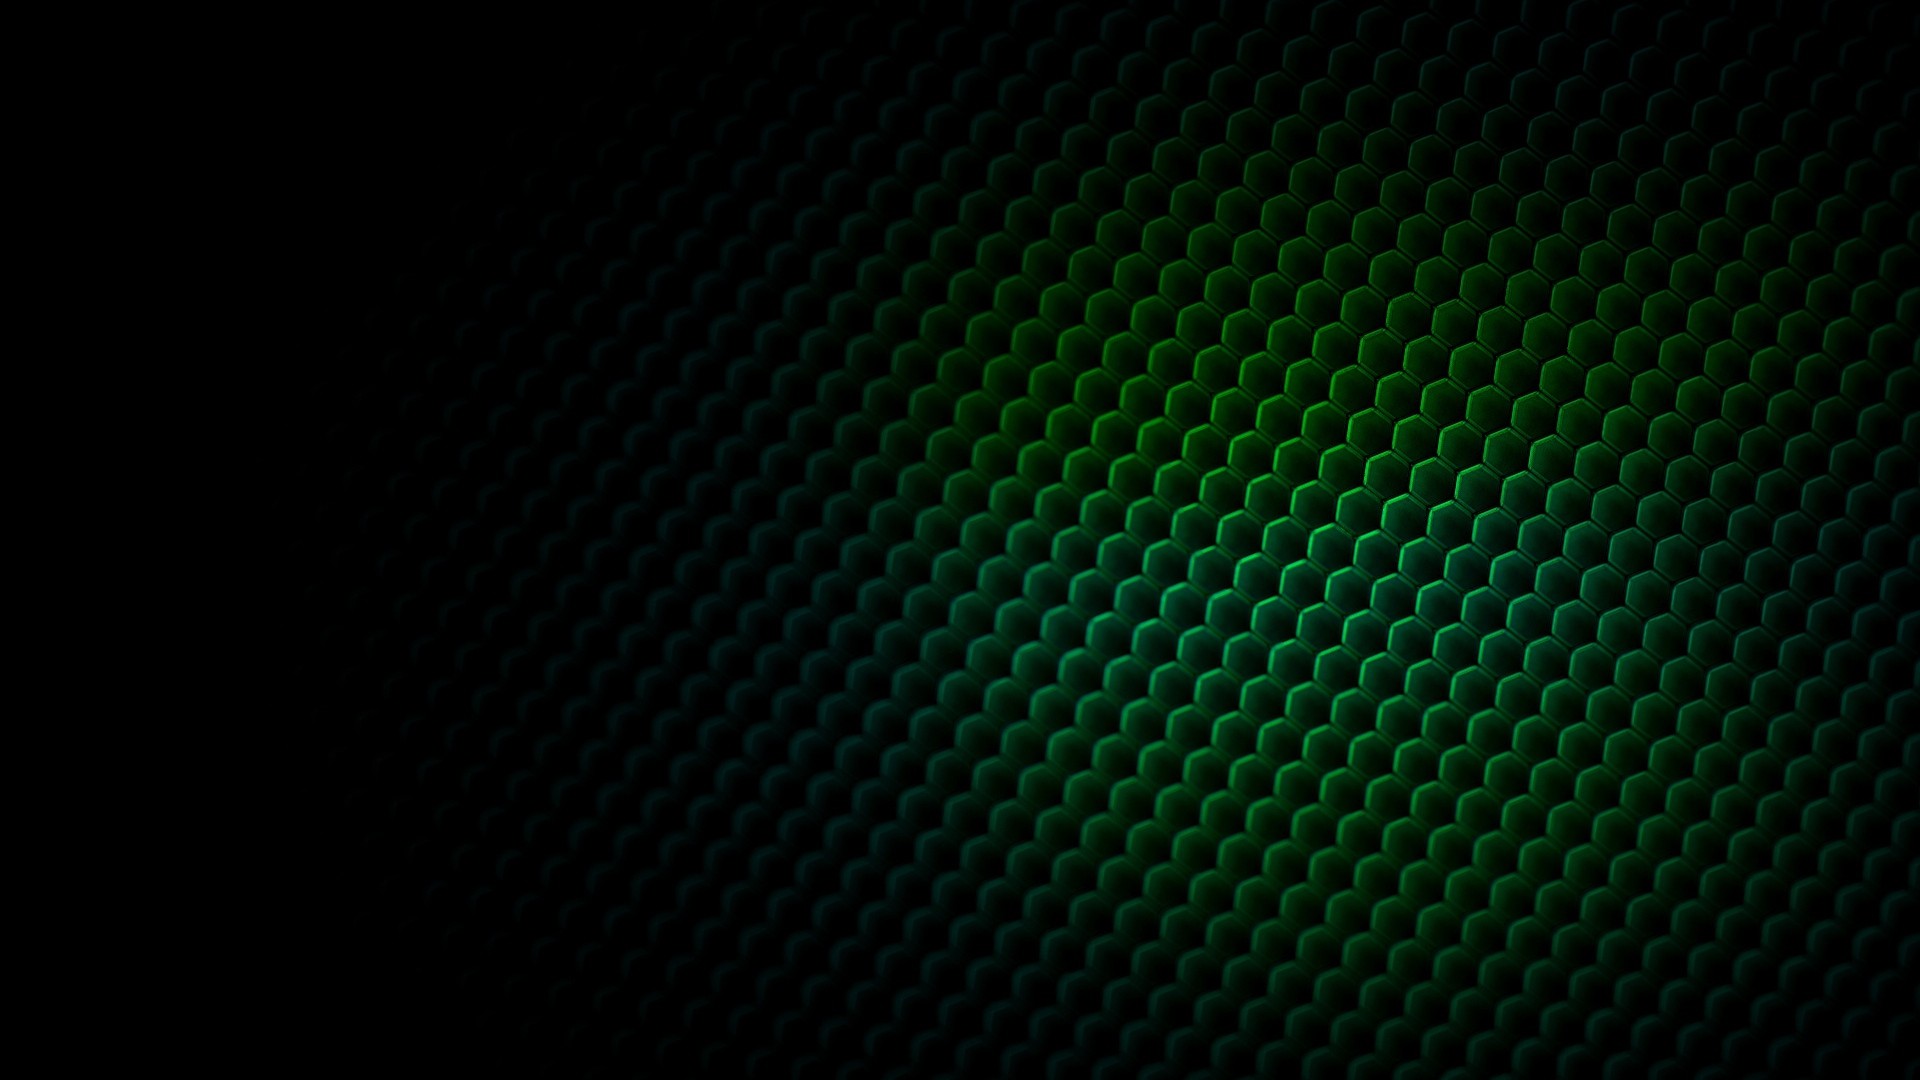 Wallpaper HD Dark Green With Resolution 1920X1080 pixel. You can make this wallpaper for your Desktop Computer Backgrounds, Mac Wallpapers, Android Lock screen or iPhone Screensavers